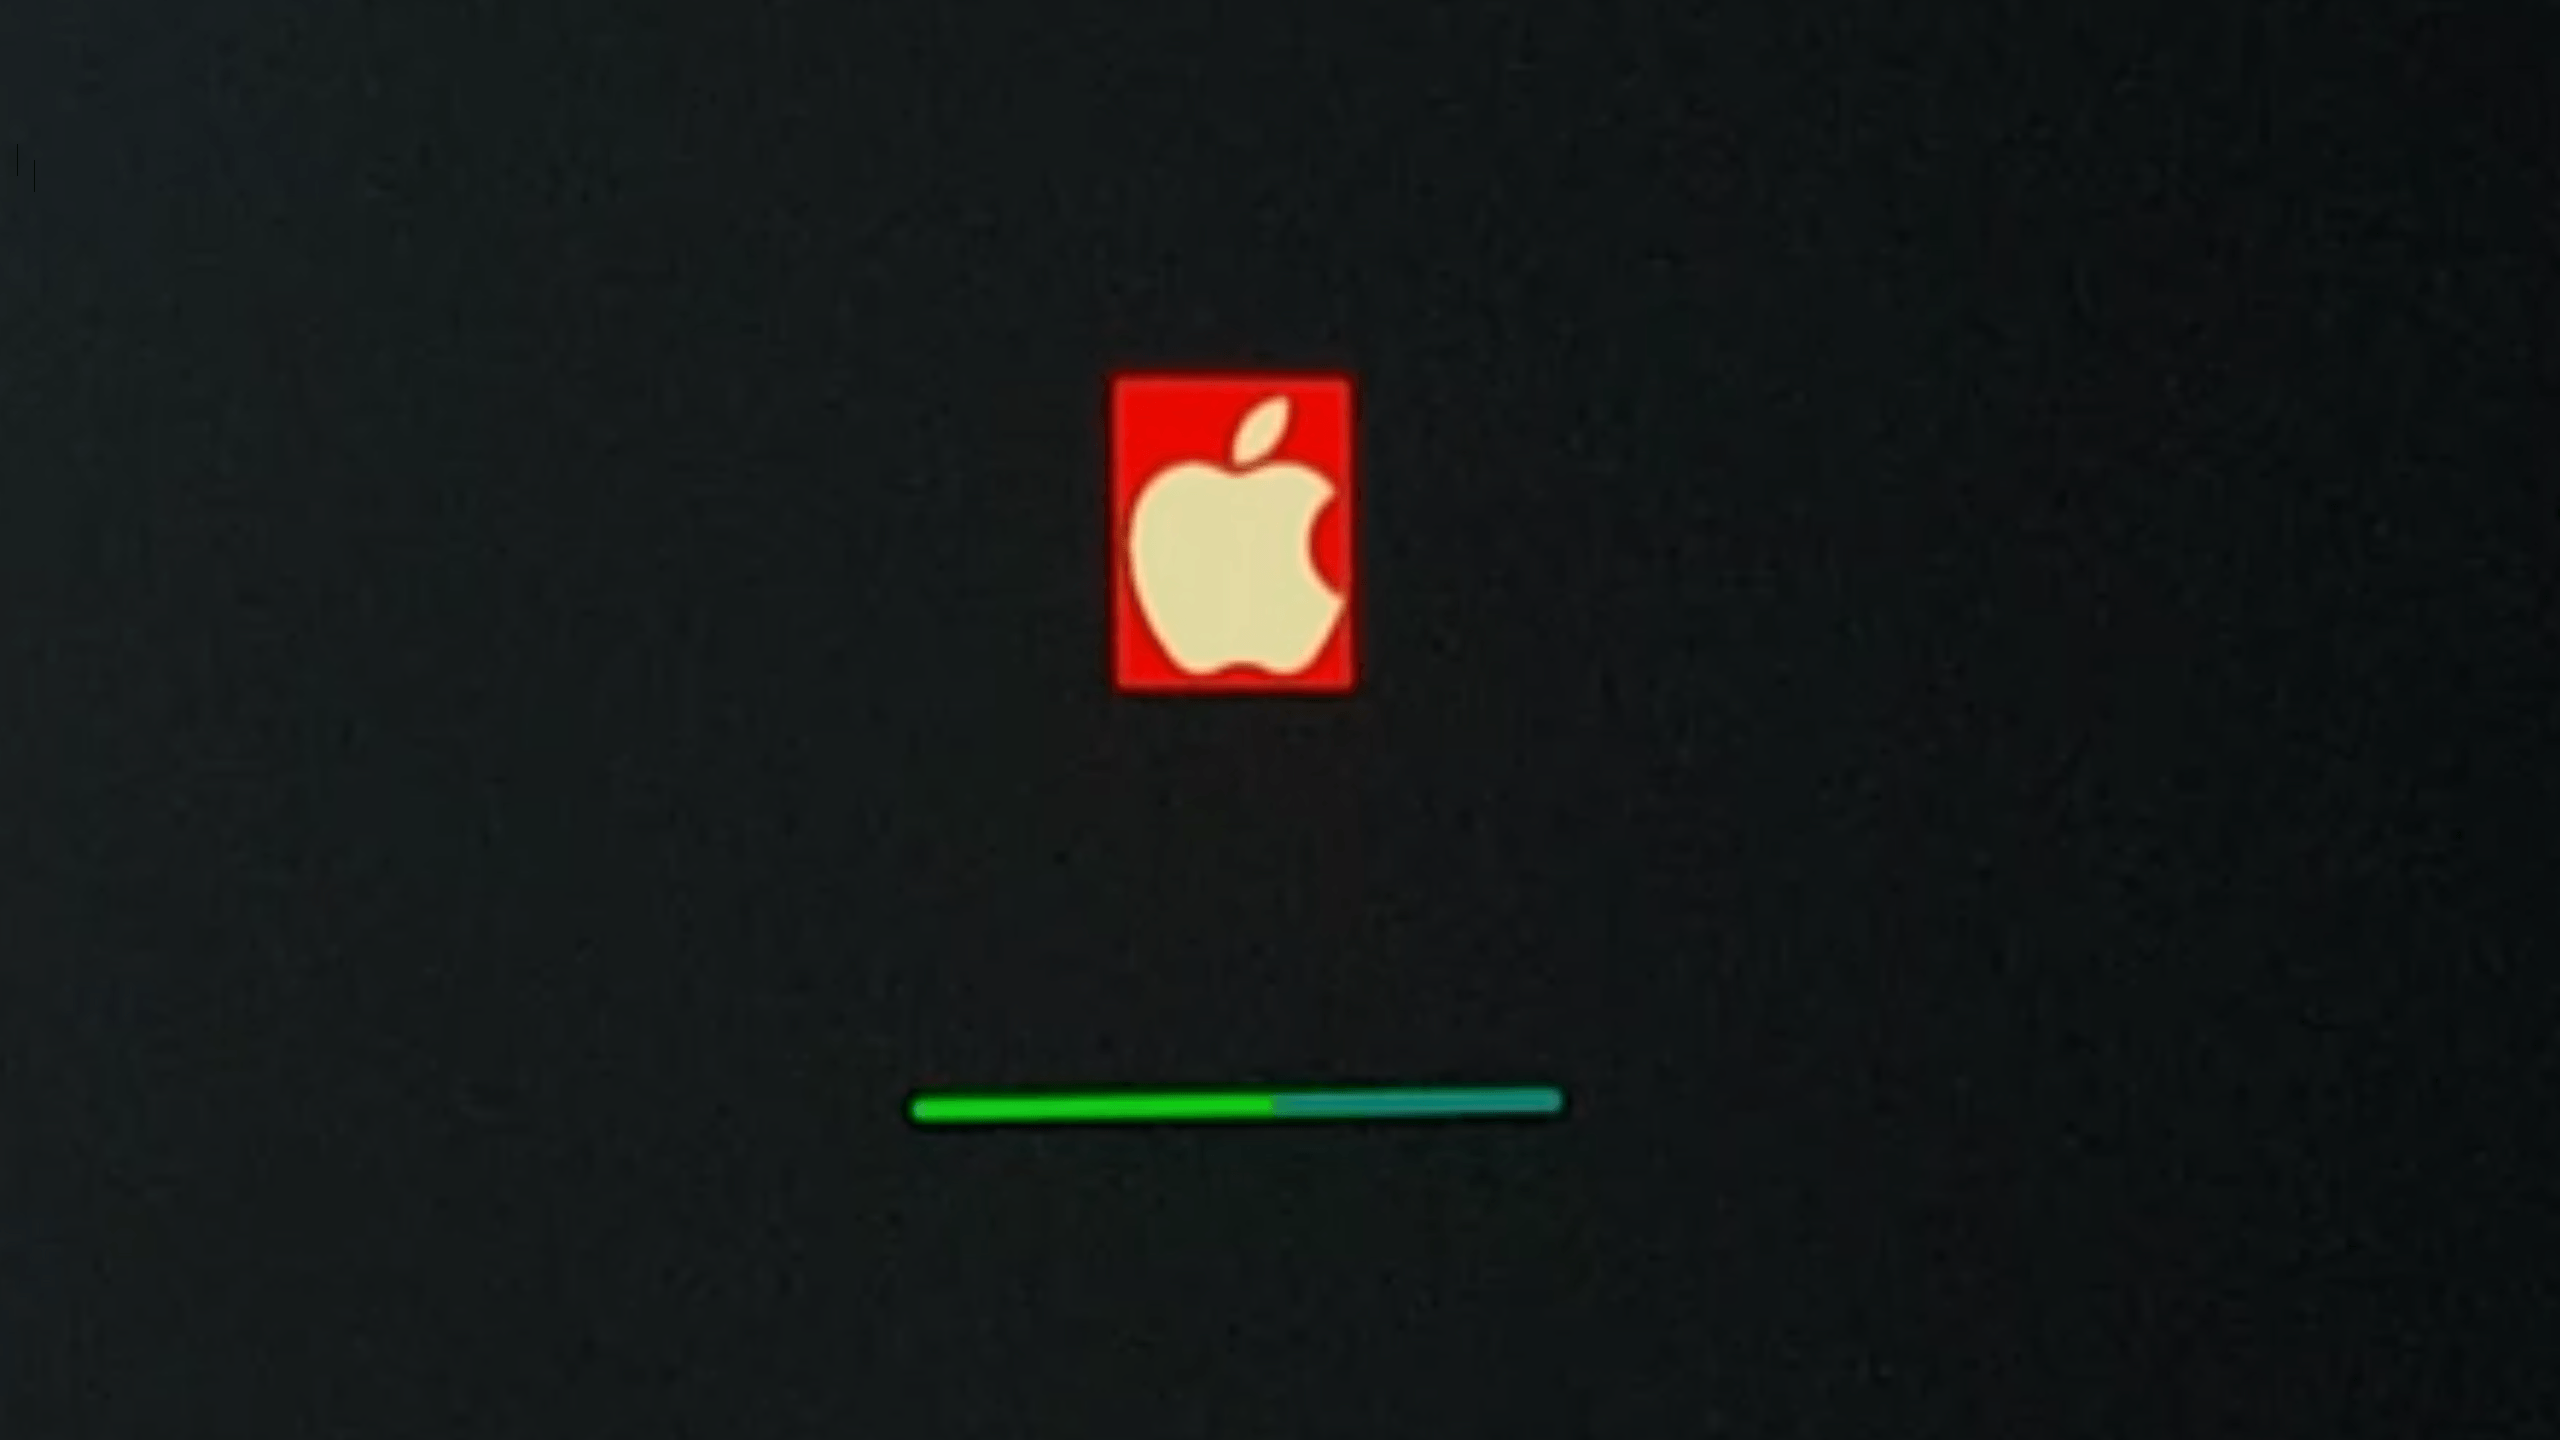 Red and Green Apple Logo - iMac 21.5